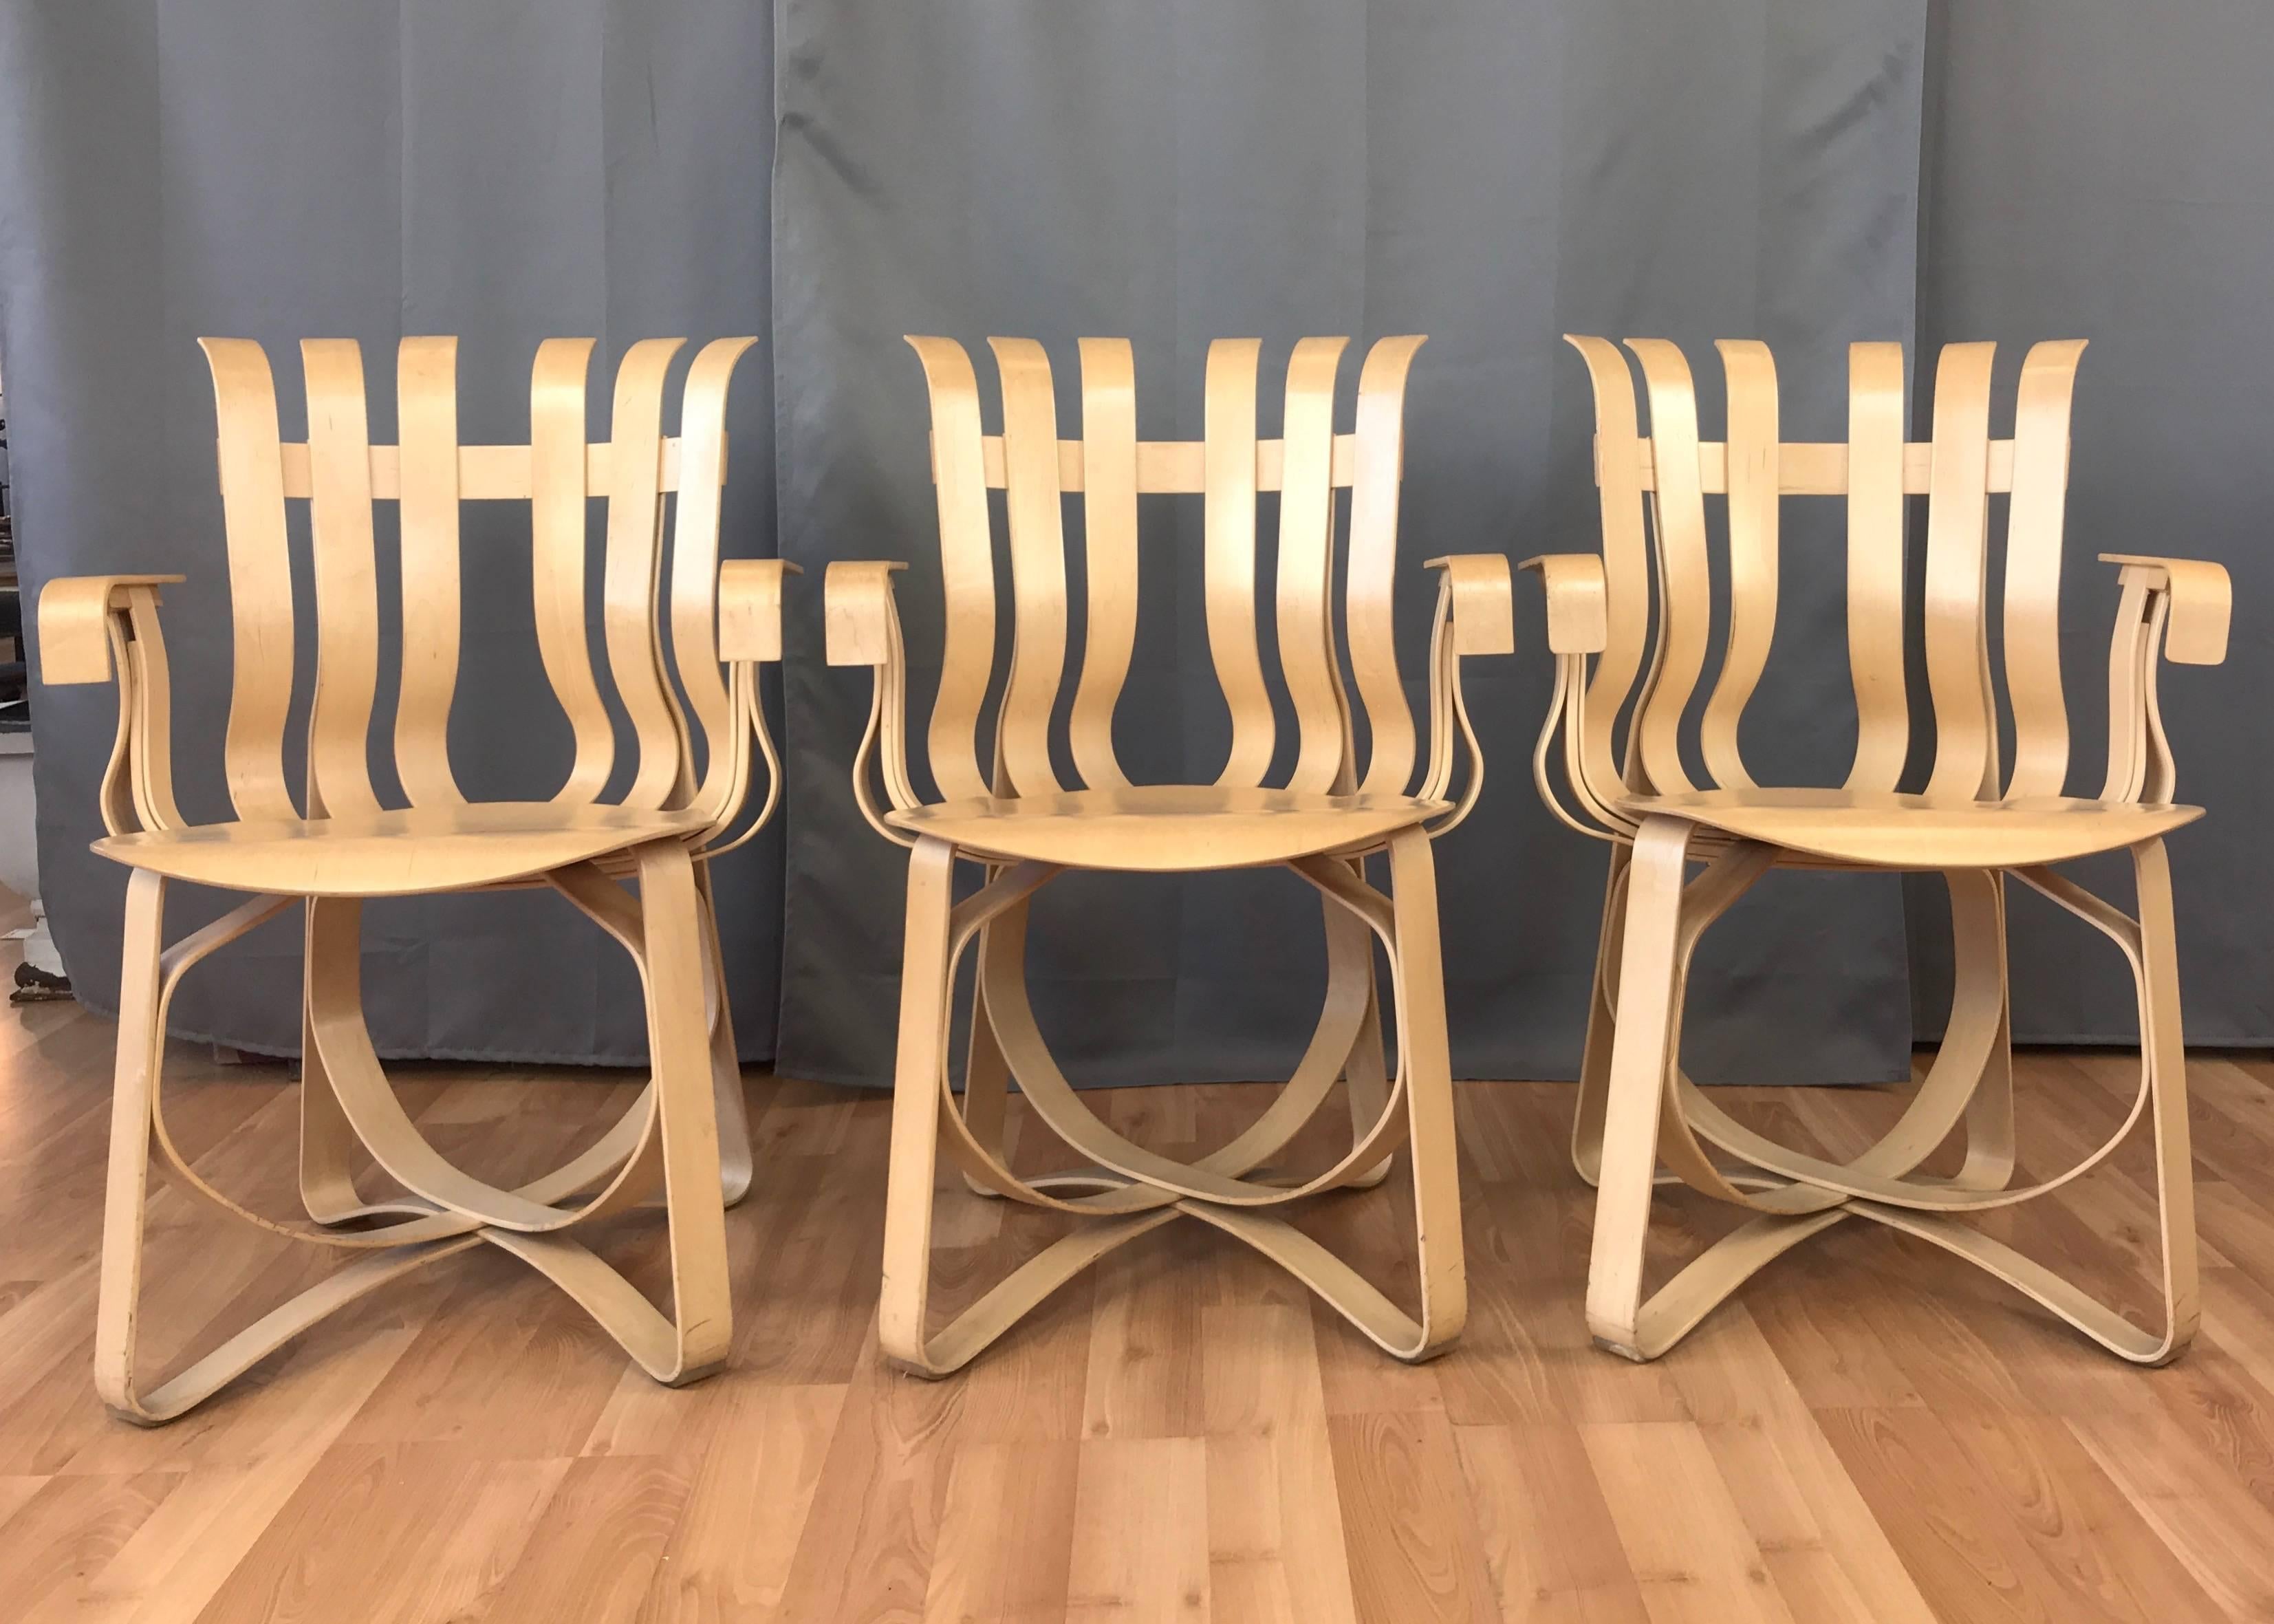 Three fantastic 1999–2000 examples of Frank O. Gehry’s hat trick chairs for Knoll that were designed in 1990, offered individually.

Though named with a nod to hockey by the Pritzker Prize-winning Canadian-born architect and designer, this singular